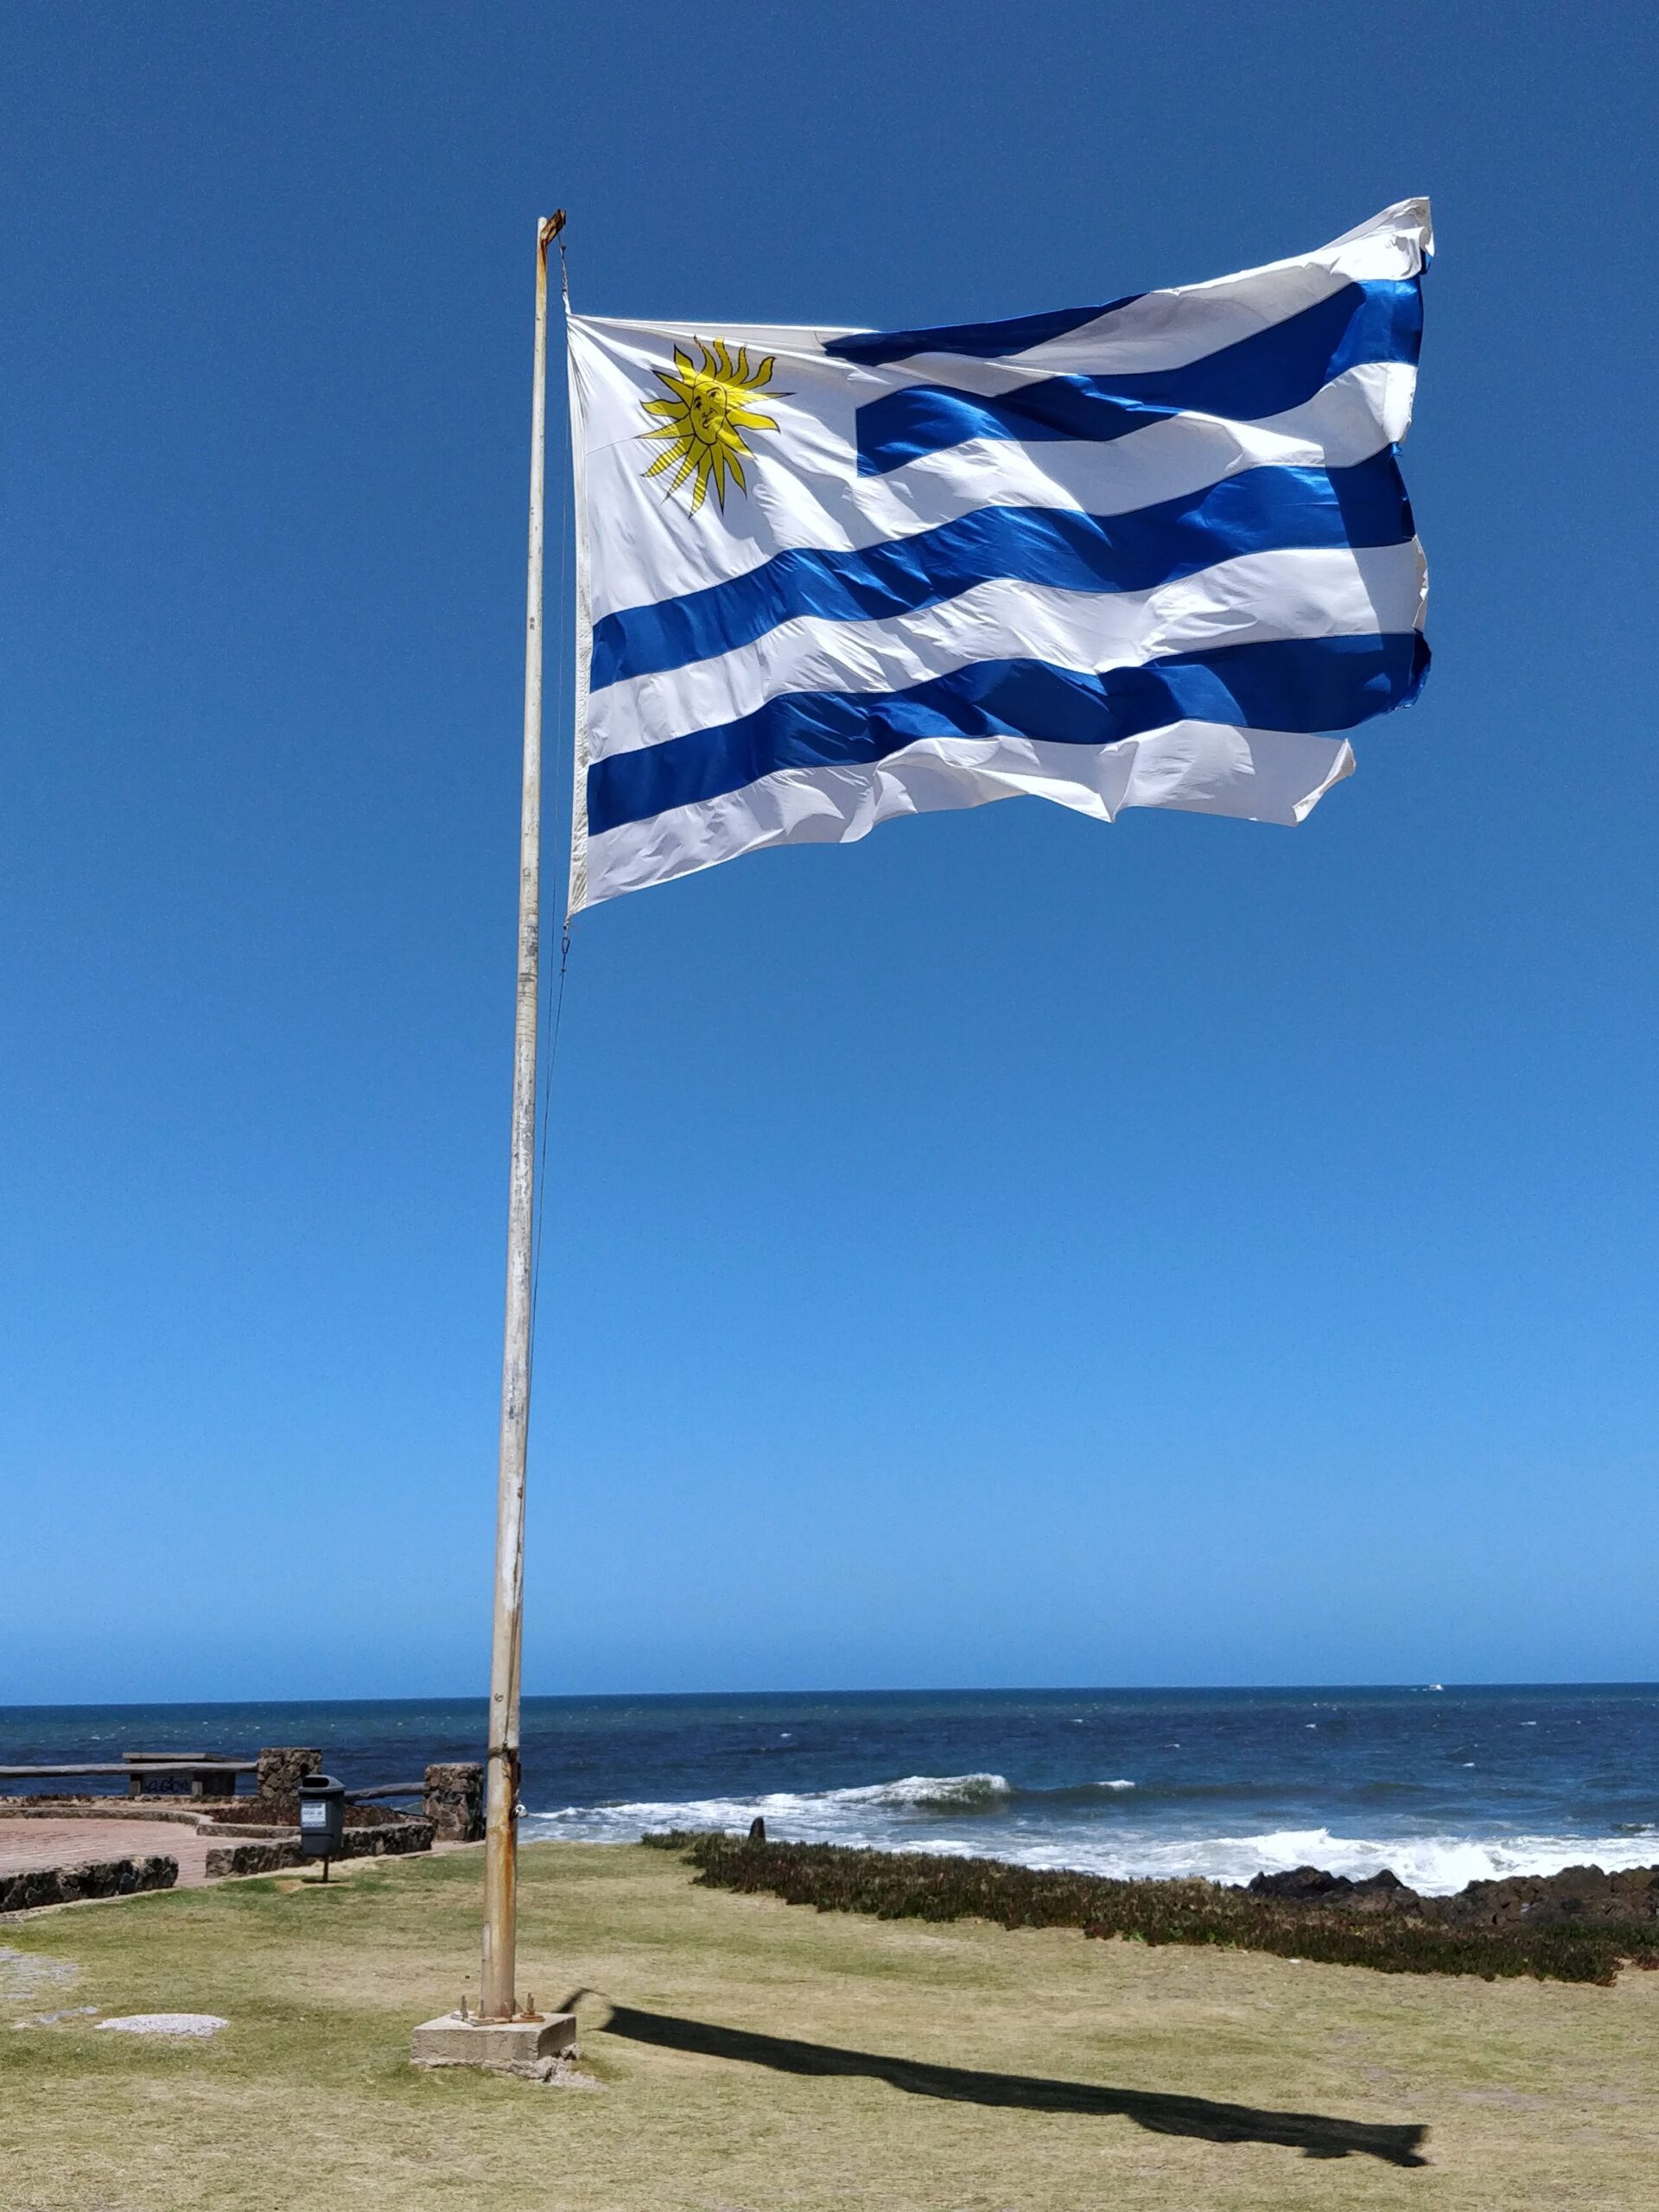 A Corruption Scandal Is Making Waves in ‘Squeaky-Clean’ Uruguay